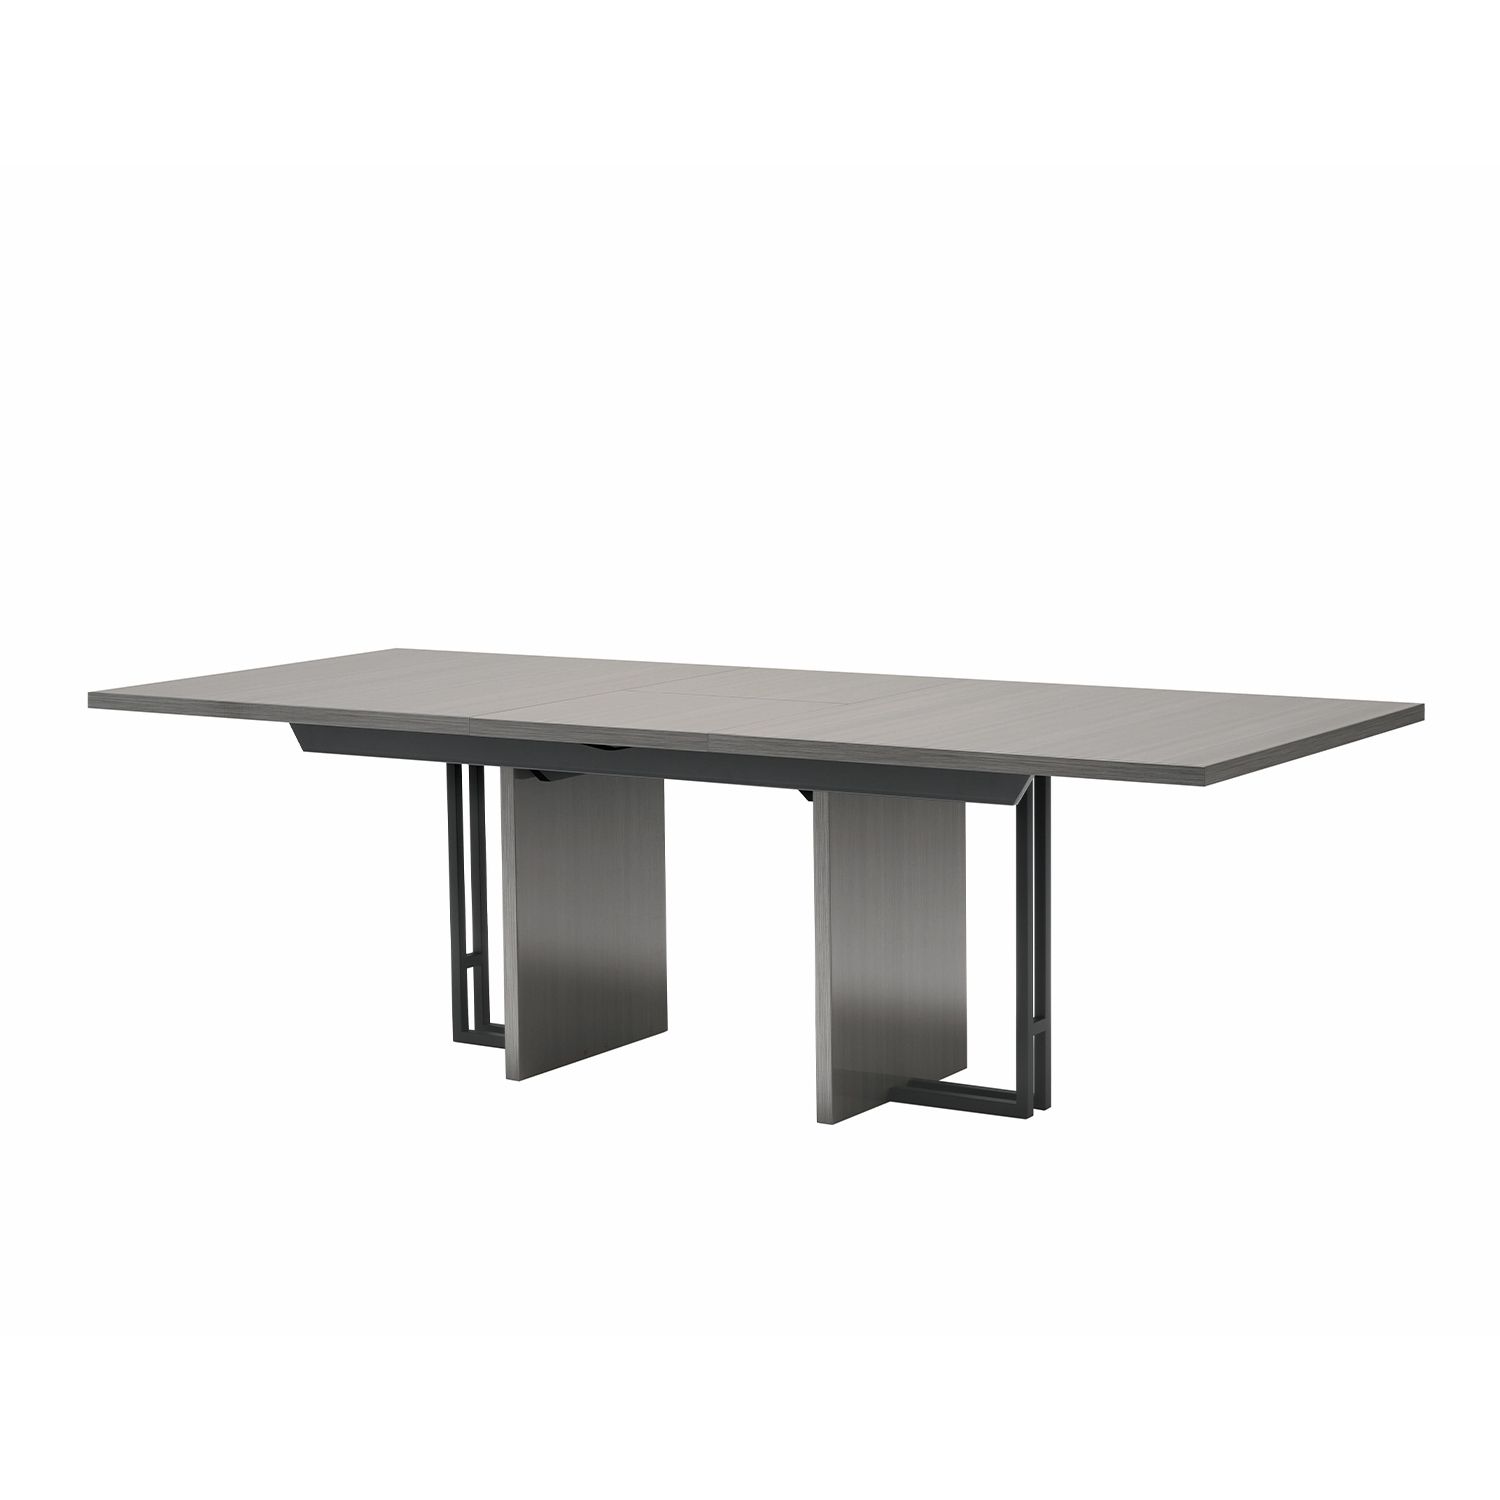 Latest Alf Italia Novecento Extending 160 210cm Dining Table In Silverwood High  Gloss – Furniture World With Regard To High Gloss Outdoor Tables (View 8 of 15)